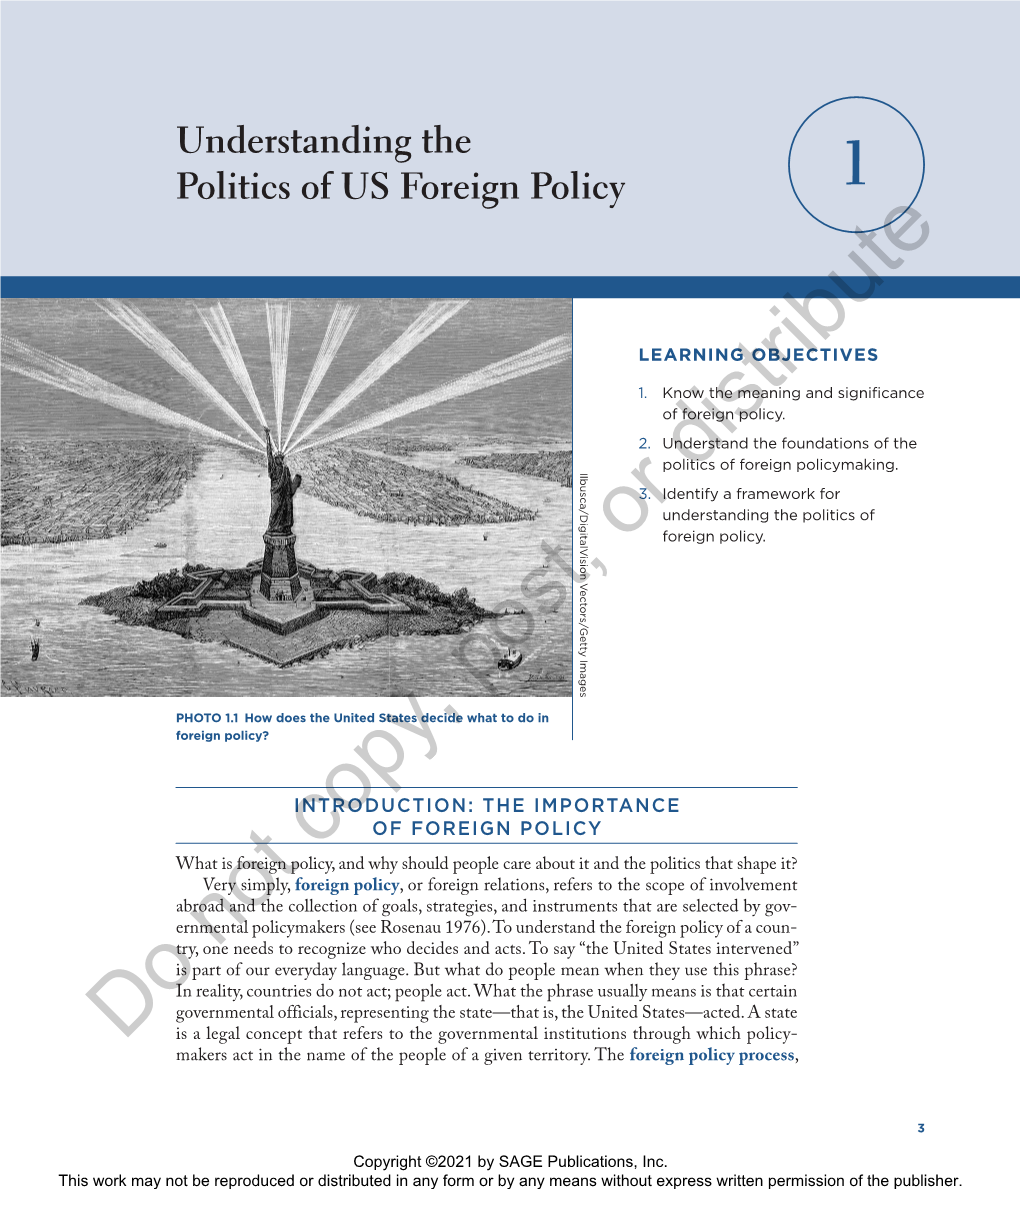 Understanding the Politics of US Foreign Policy 1